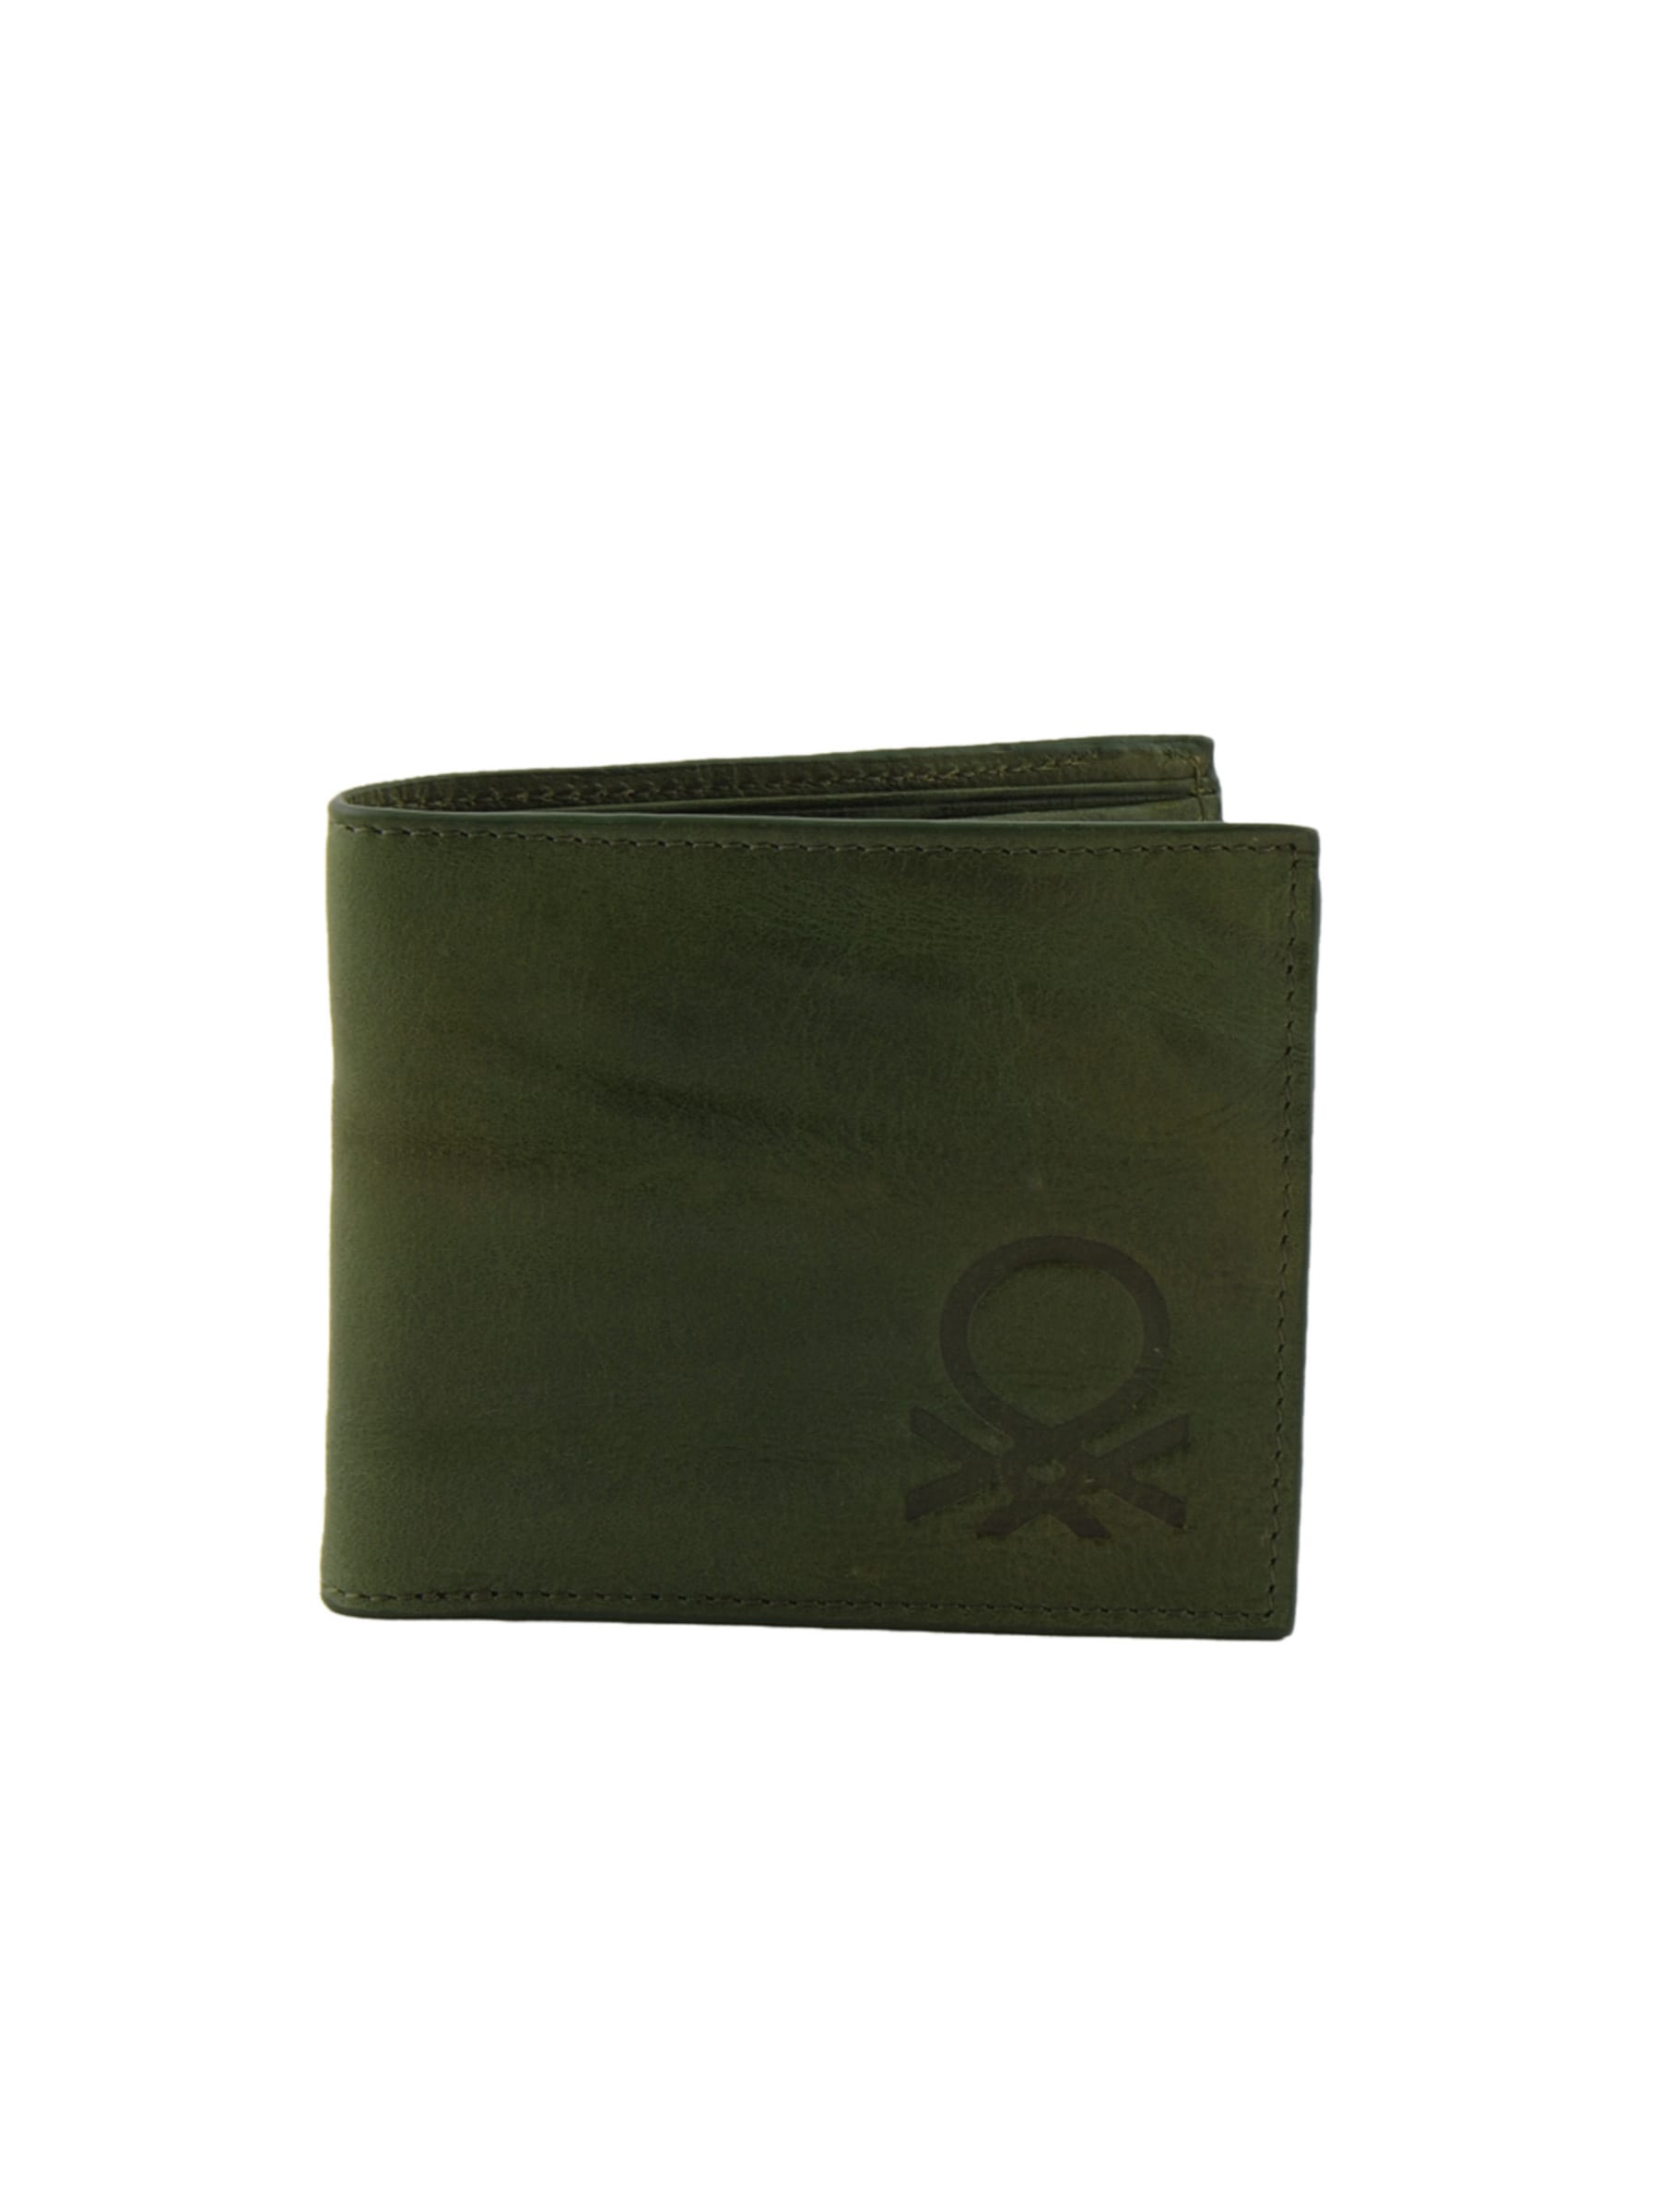 United Colors of Benetton Men Solid Green Wallets